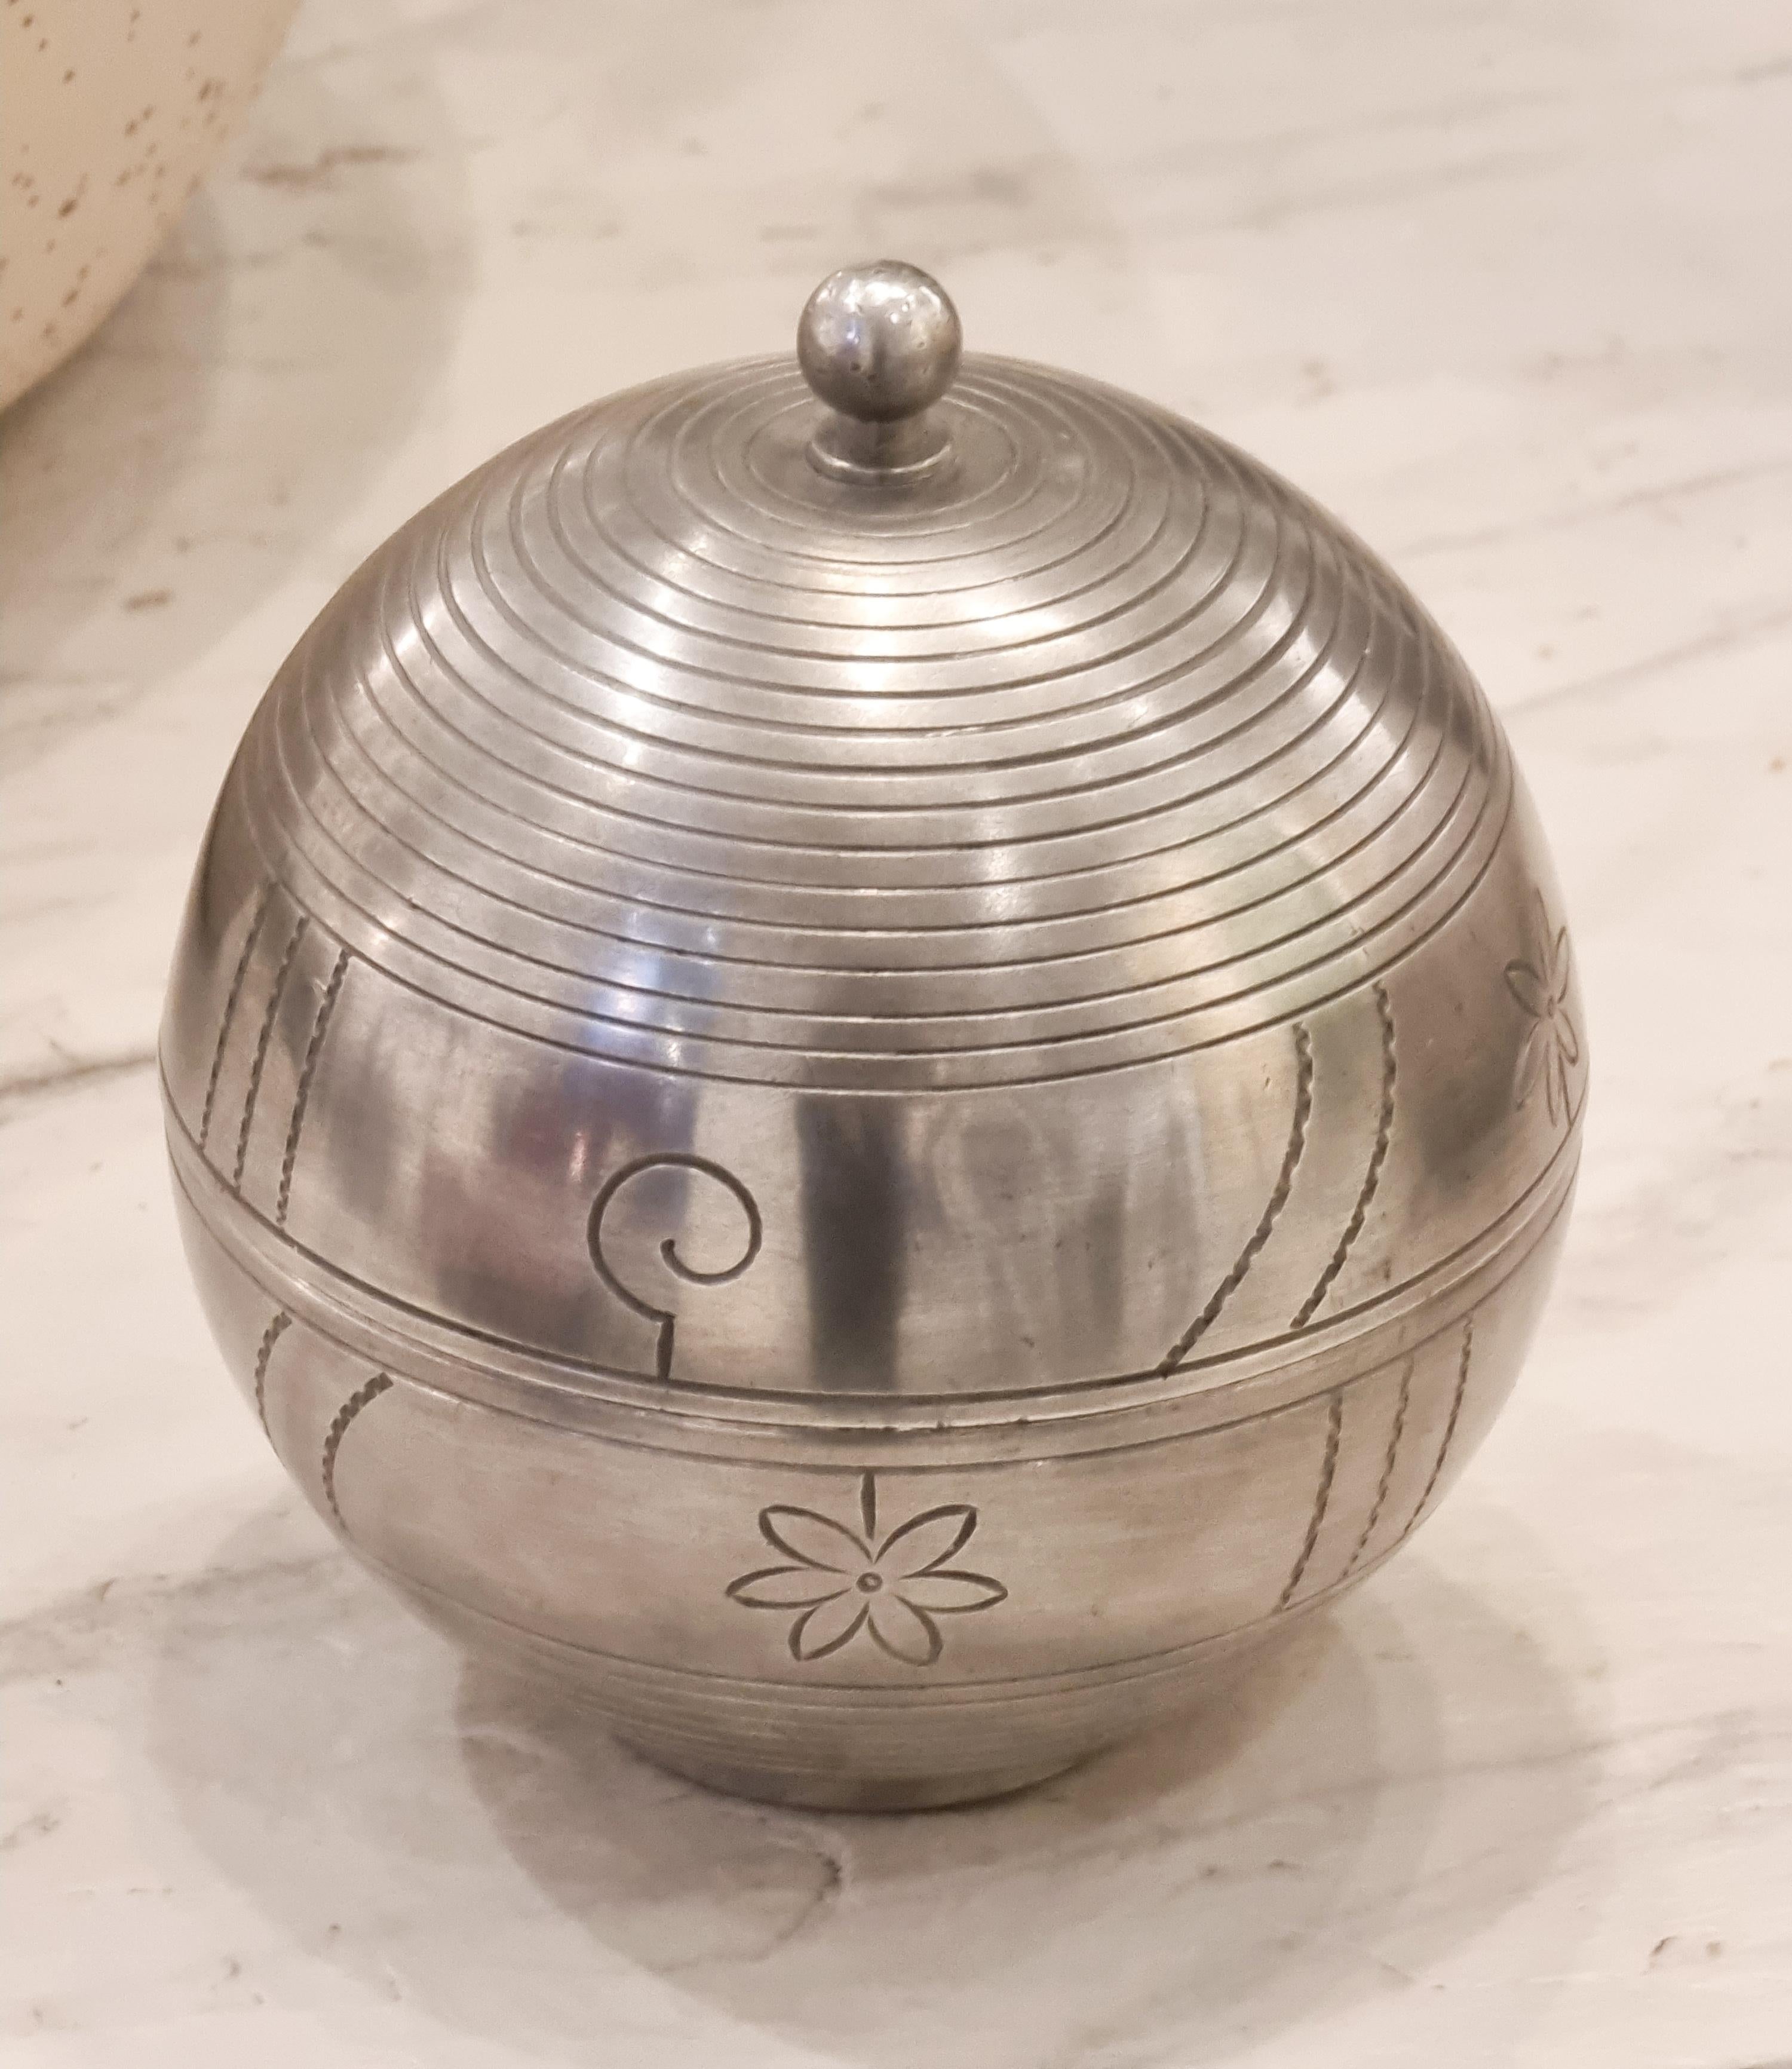 A rare, beautiful pewter bonbonnière and flower decor, attributed Sylvia Stave, Sweden 1933. Manufactured by CG. Hallberg, with hallmarks. In good condition. Smaller signs of age and wear. 


About the artist: 
Sylvia Rosa Agneta Stave, birth name